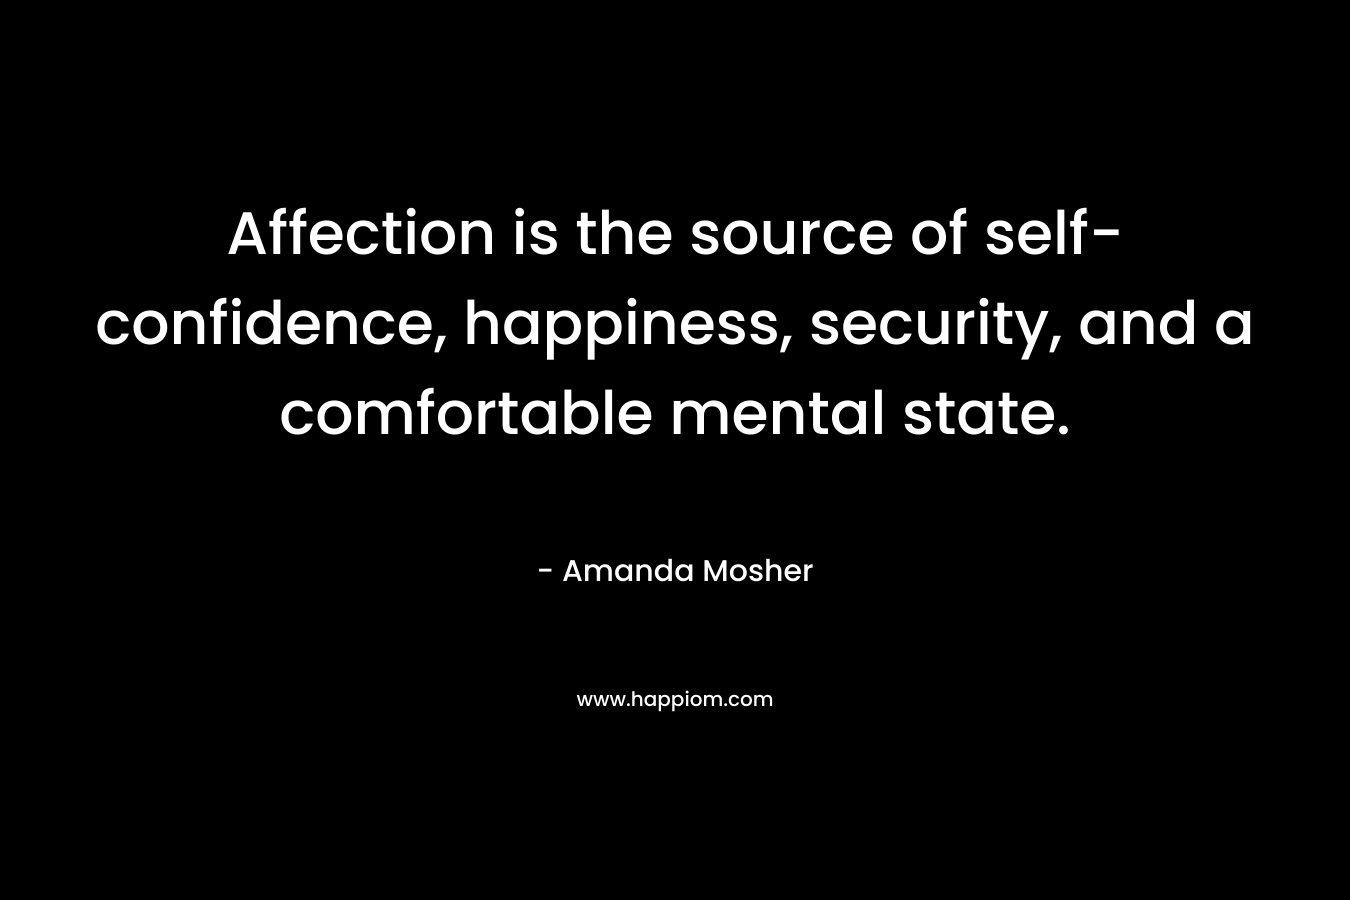 Affection is the source of self-confidence, happiness, security, and a comfortable mental state.